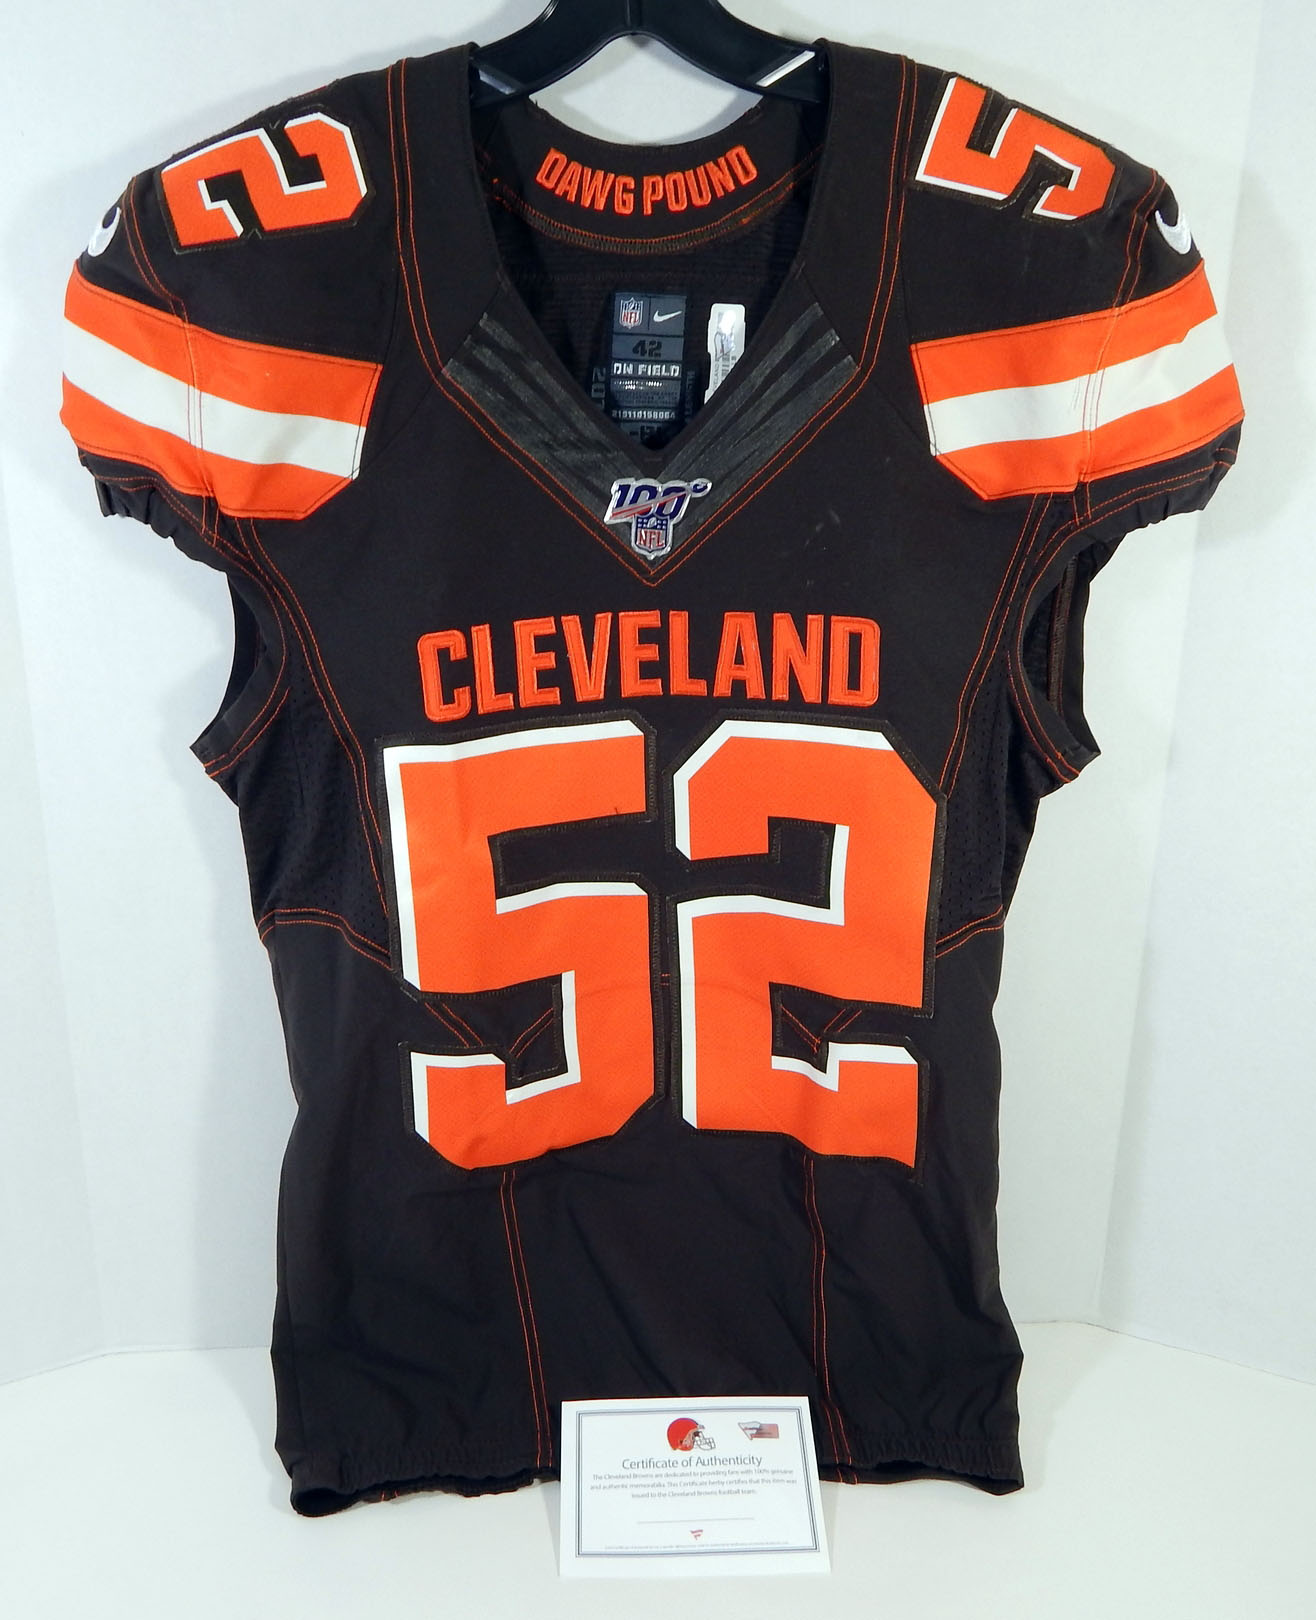 la nieve lavabo Ten confianza 2019 Cleveland Browns Ray-Ray Armstrong #52 Game Used Brown Jersey 100 NFL  P 7 | eBay